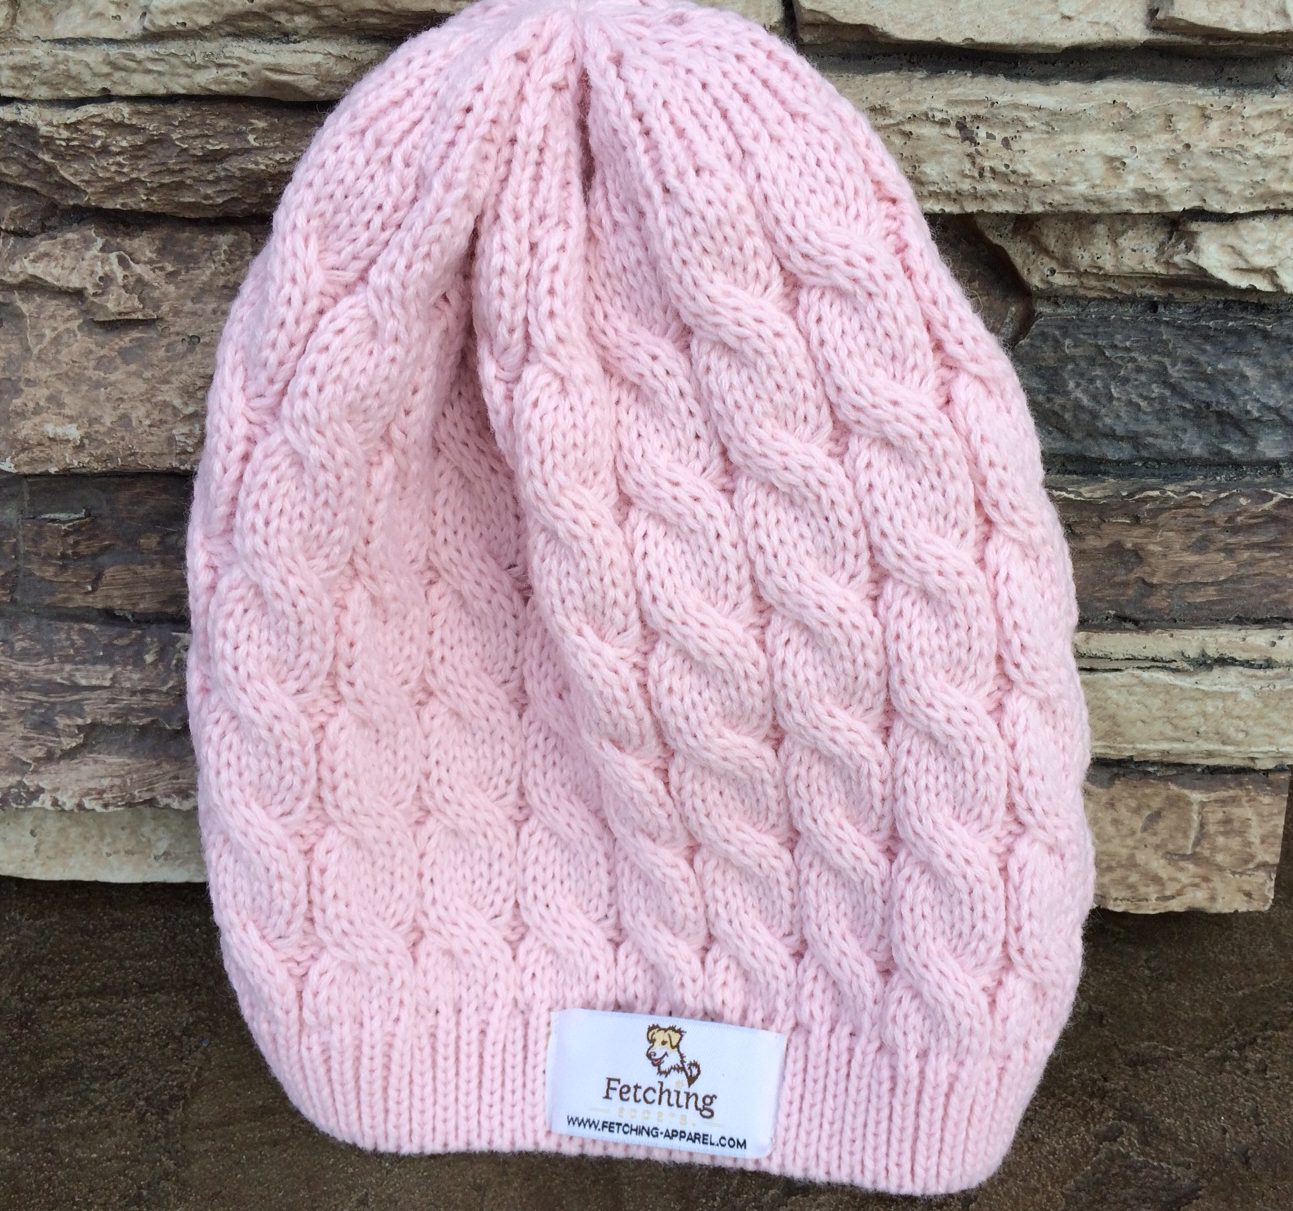 Blushing pink knit hat! Fetching Apparel donates 40% of profits to animal rescue and spay/neuter efforts.